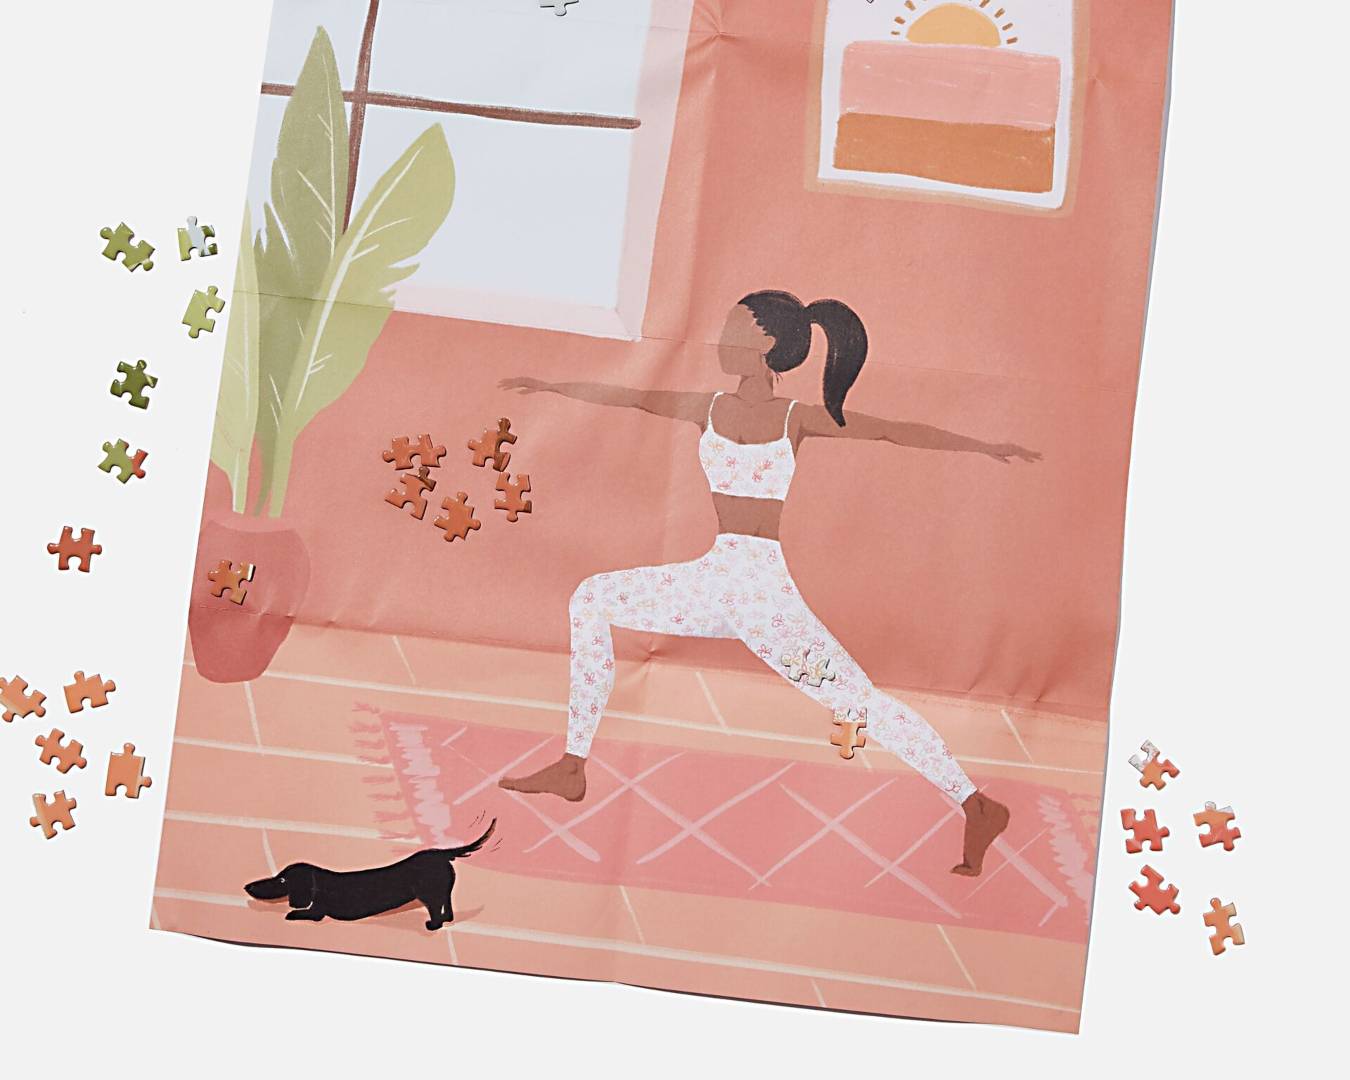 The cute, pink poster matching the jigsaw image depicts a woman doing yoga beside her cat